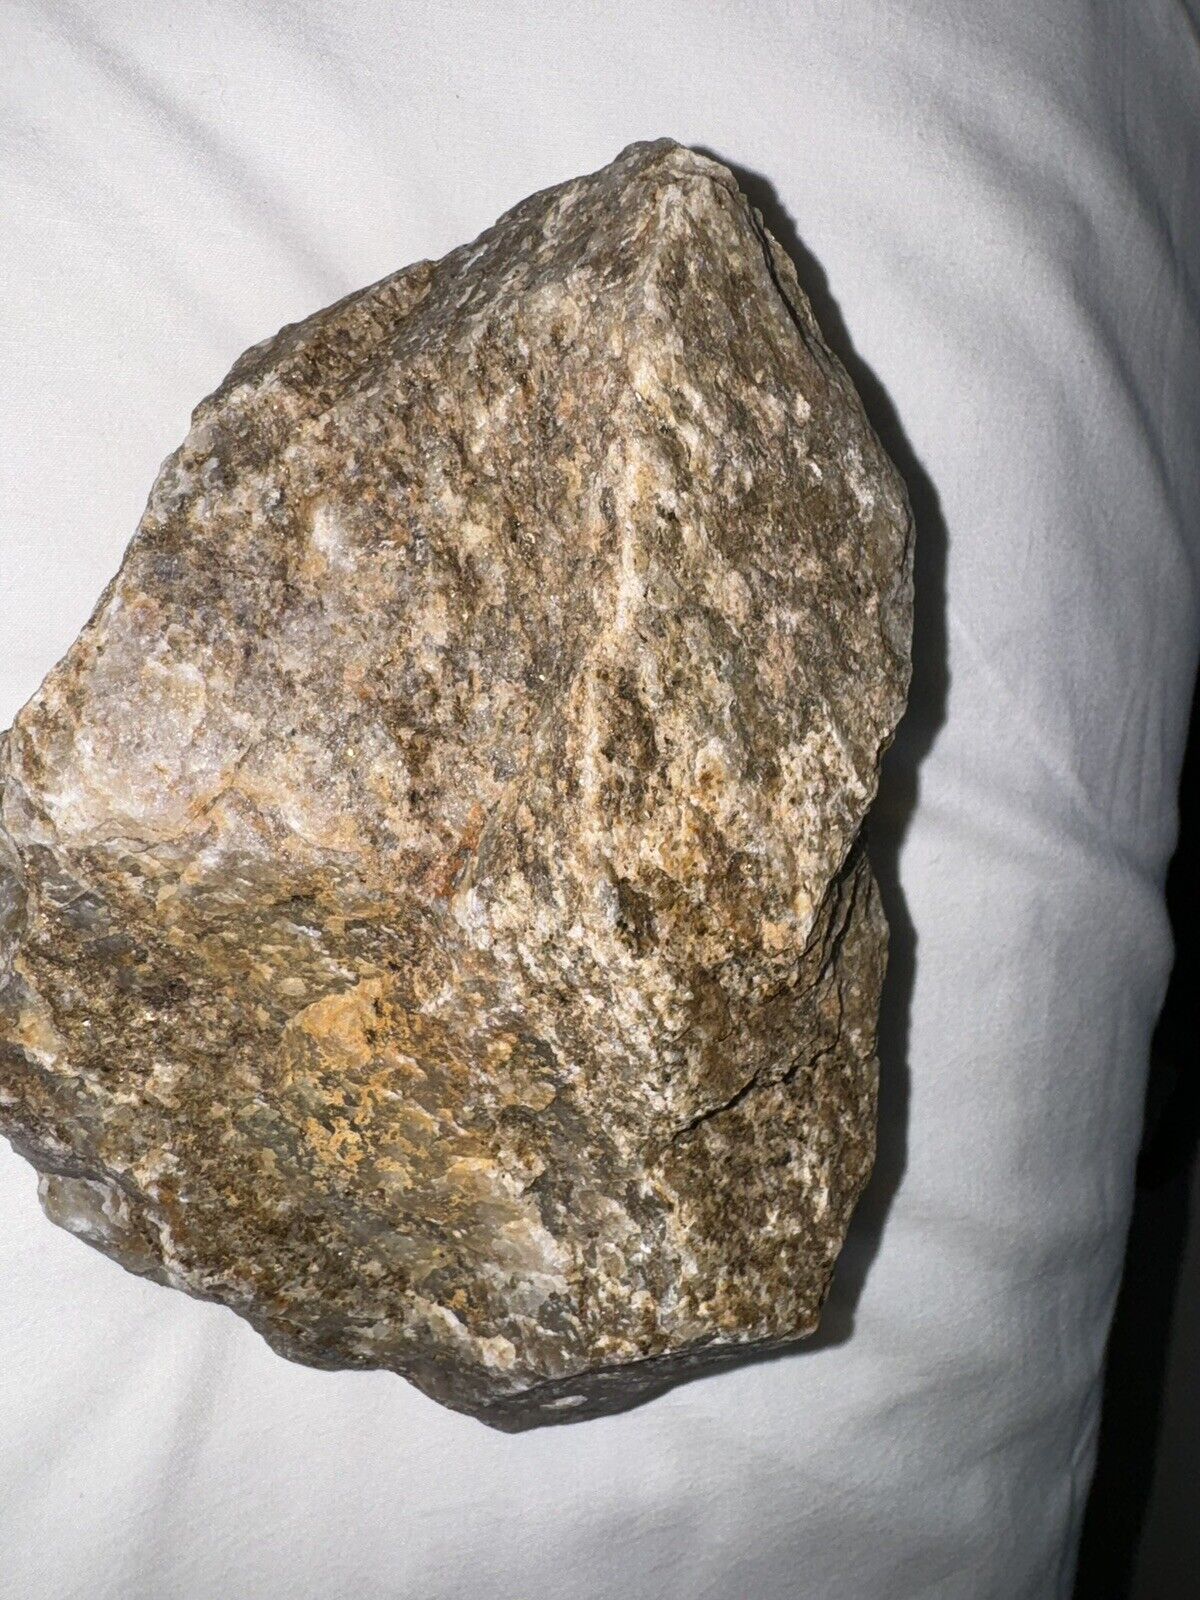 5 LBS GOLD SILVER & PLATINUM ORE-HIGH GRADE, HIGHLY MINERALIZED CA ORE